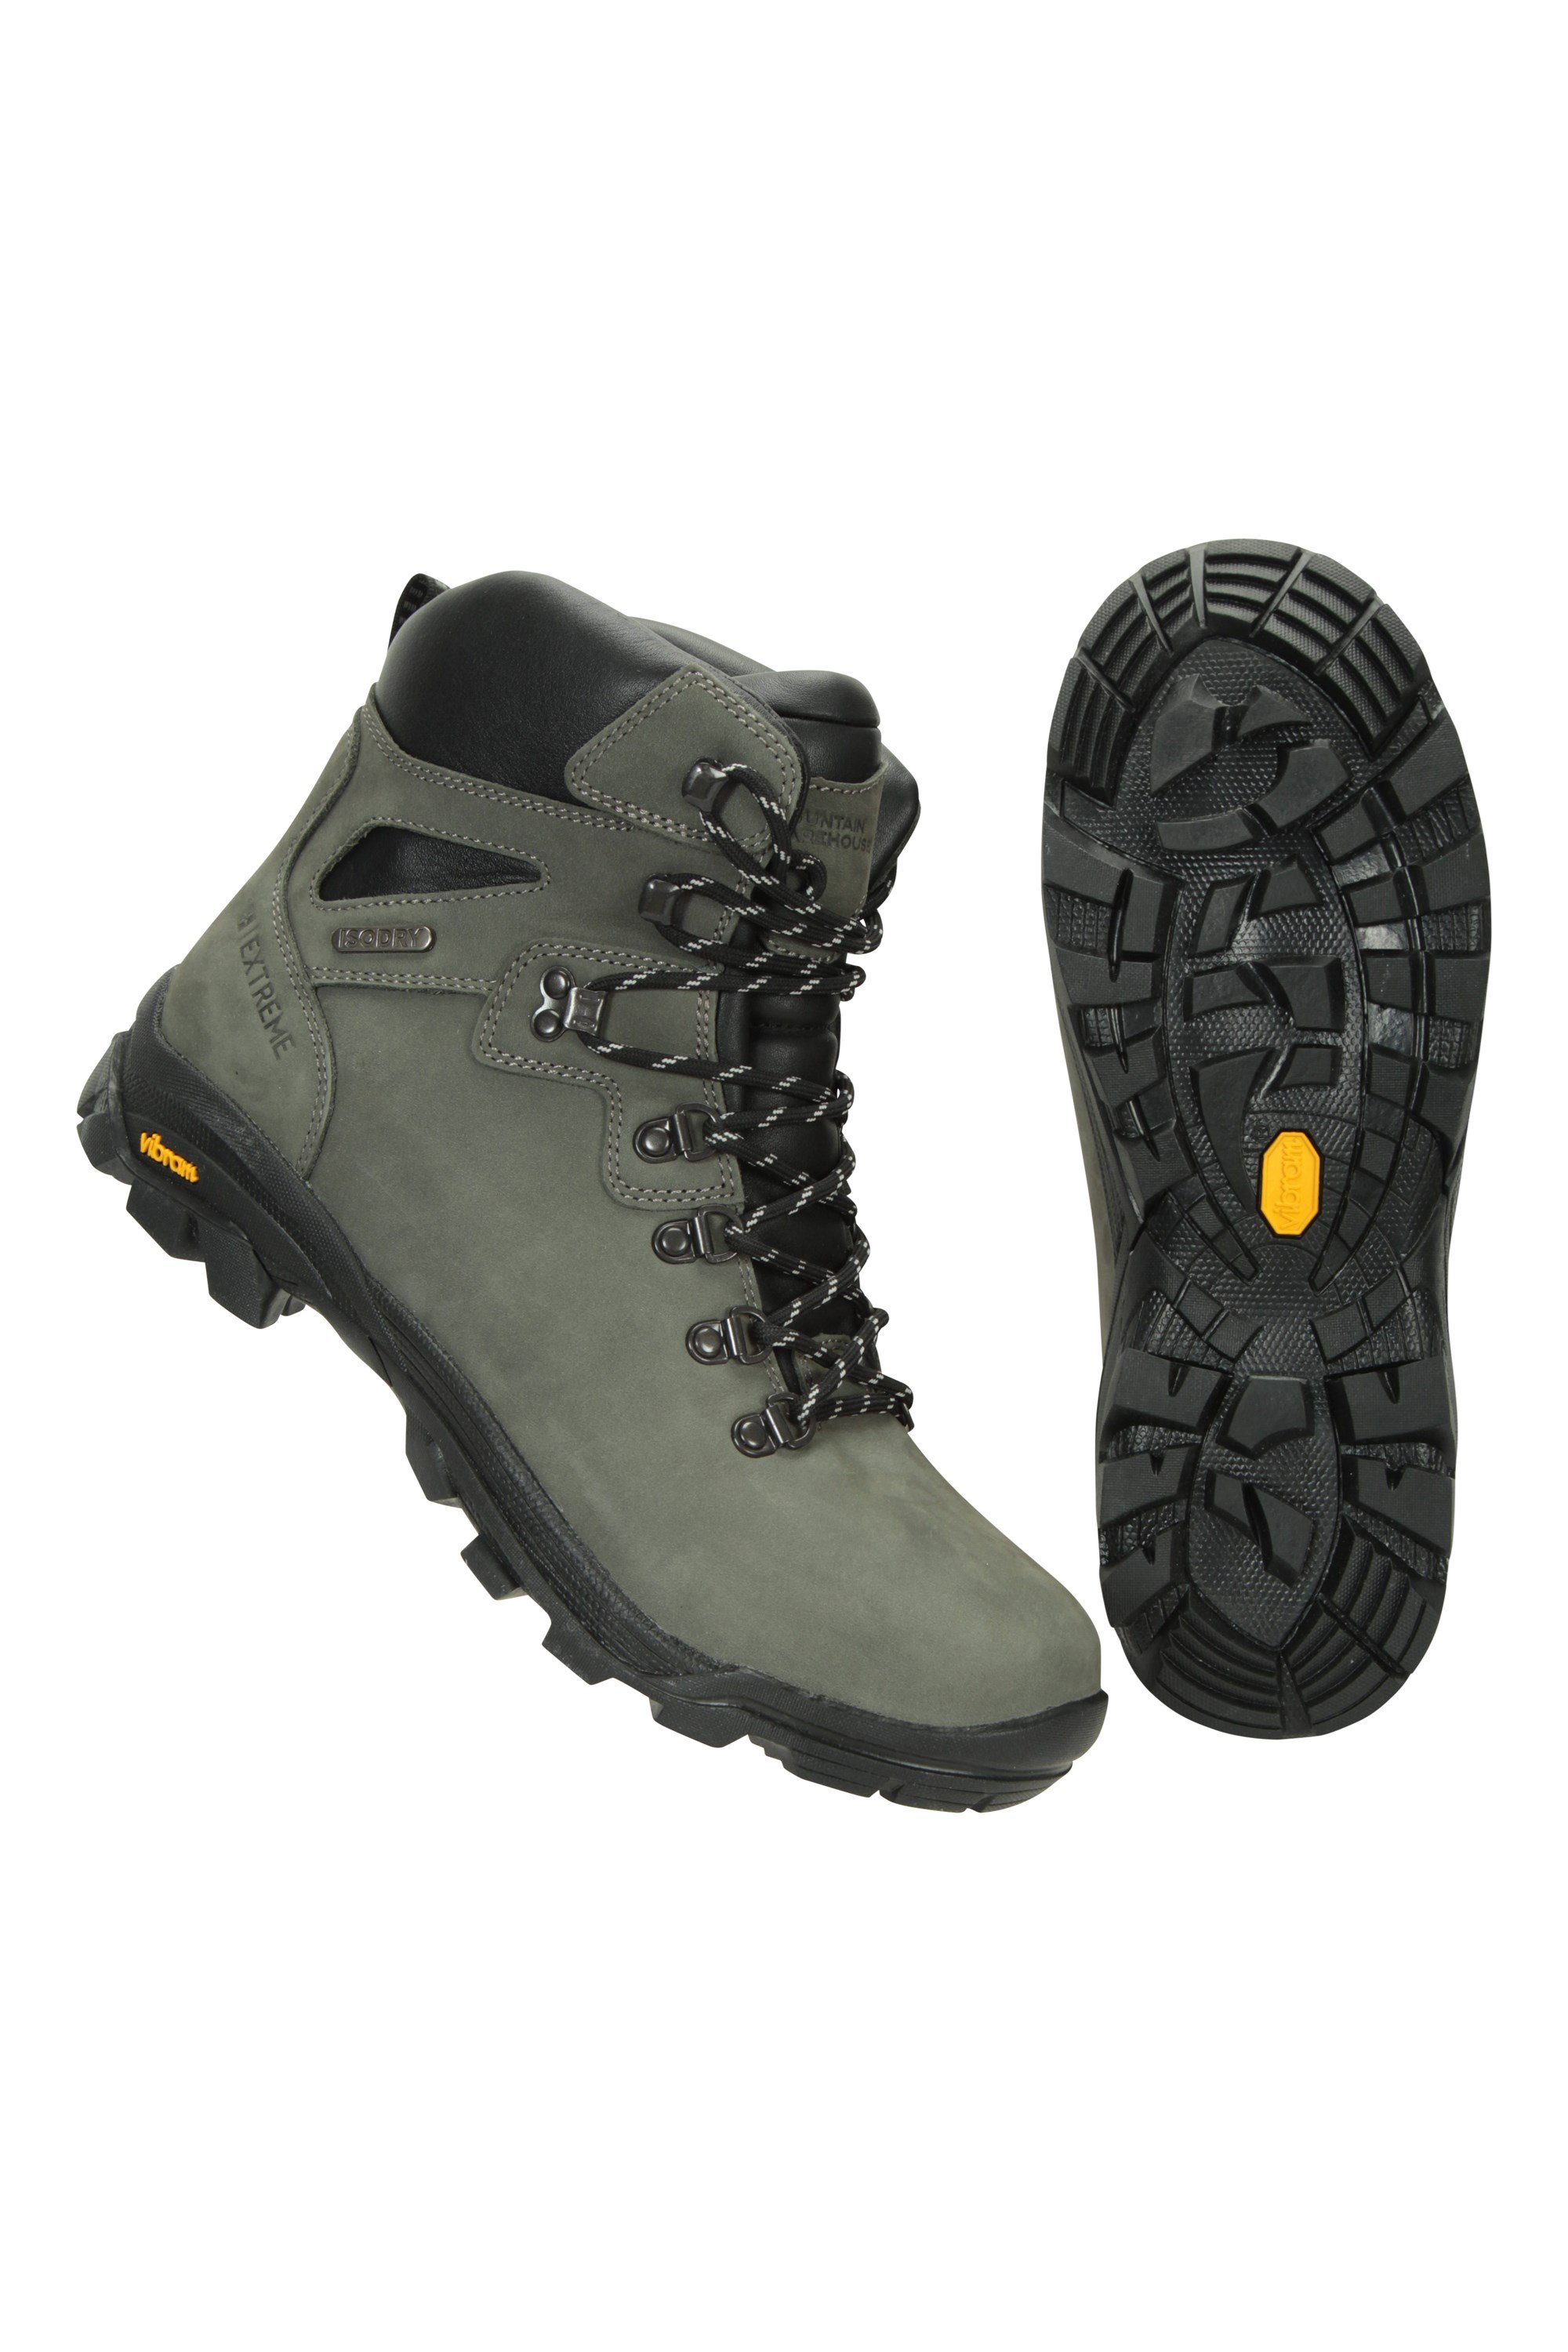 mens walking boots go outdoors